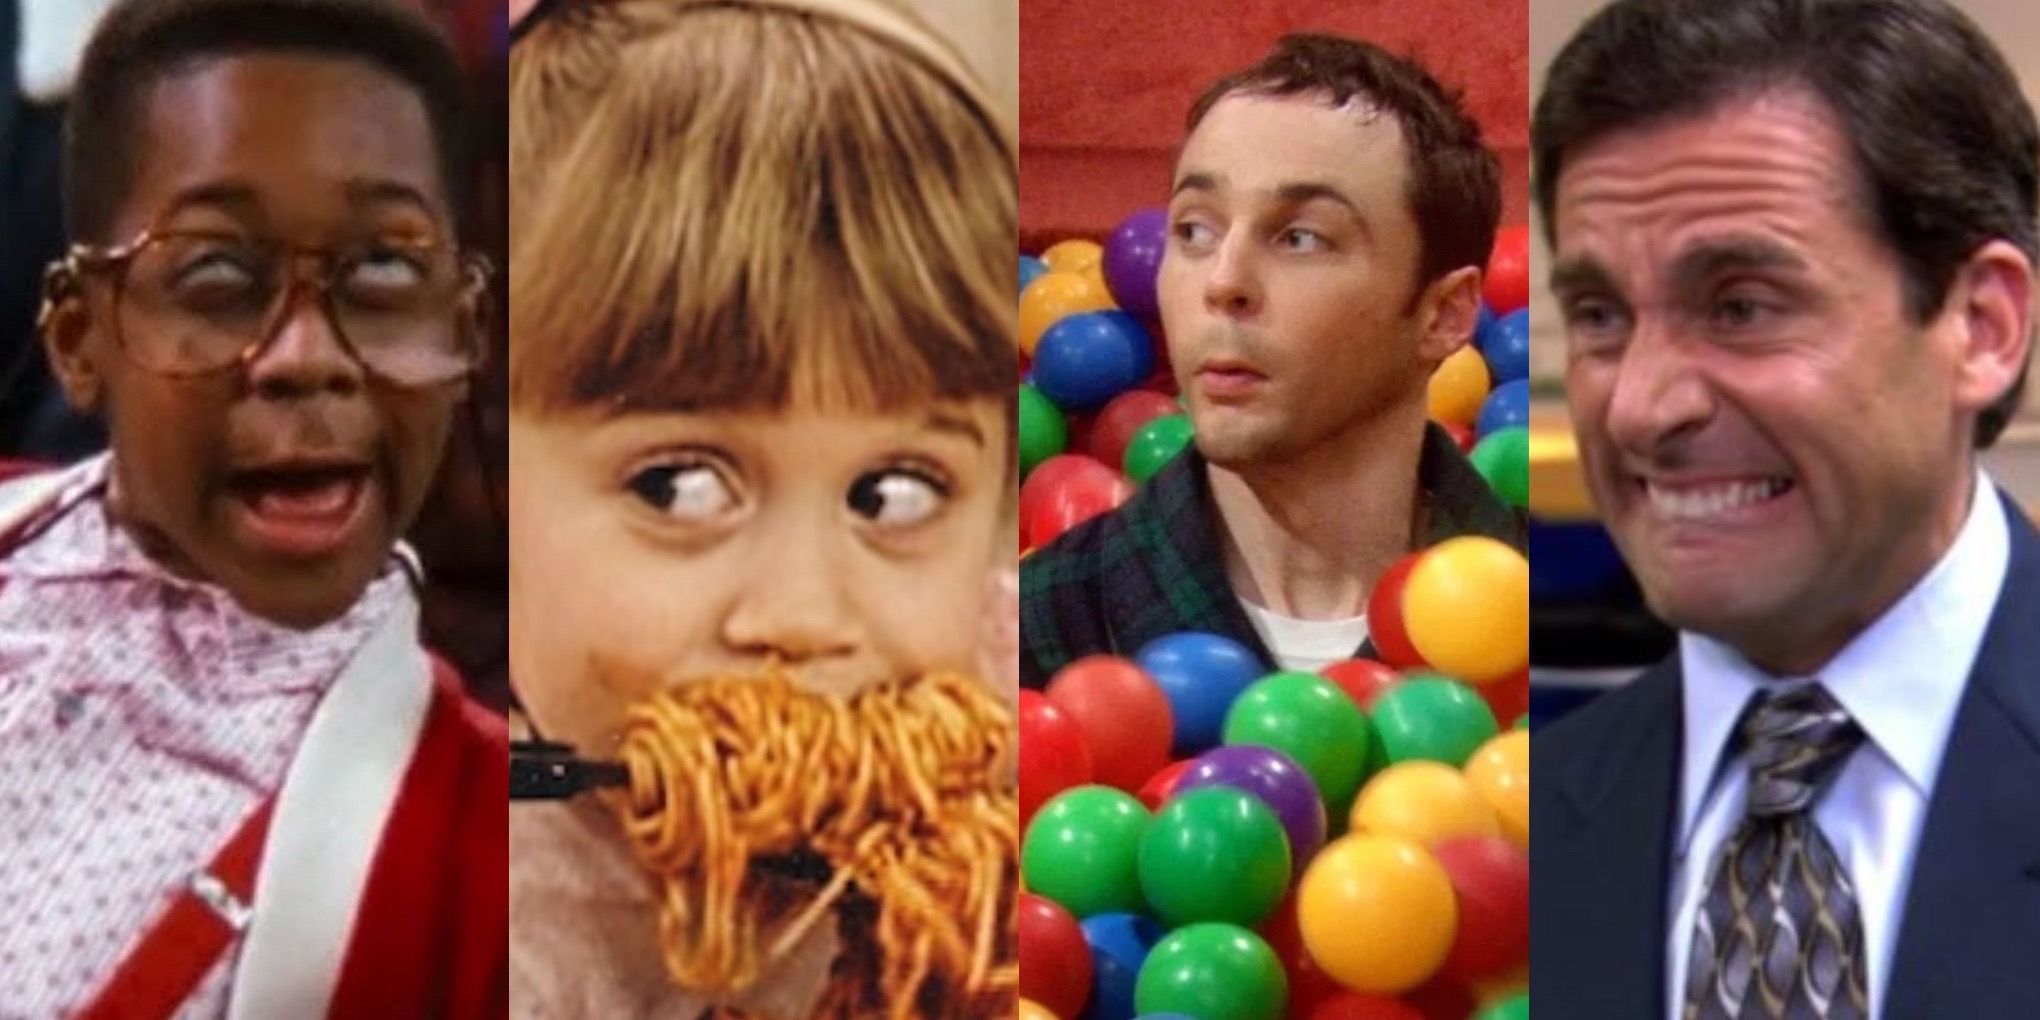 Stills from Family Matters, Full House, The Big Bang Theory and The Office